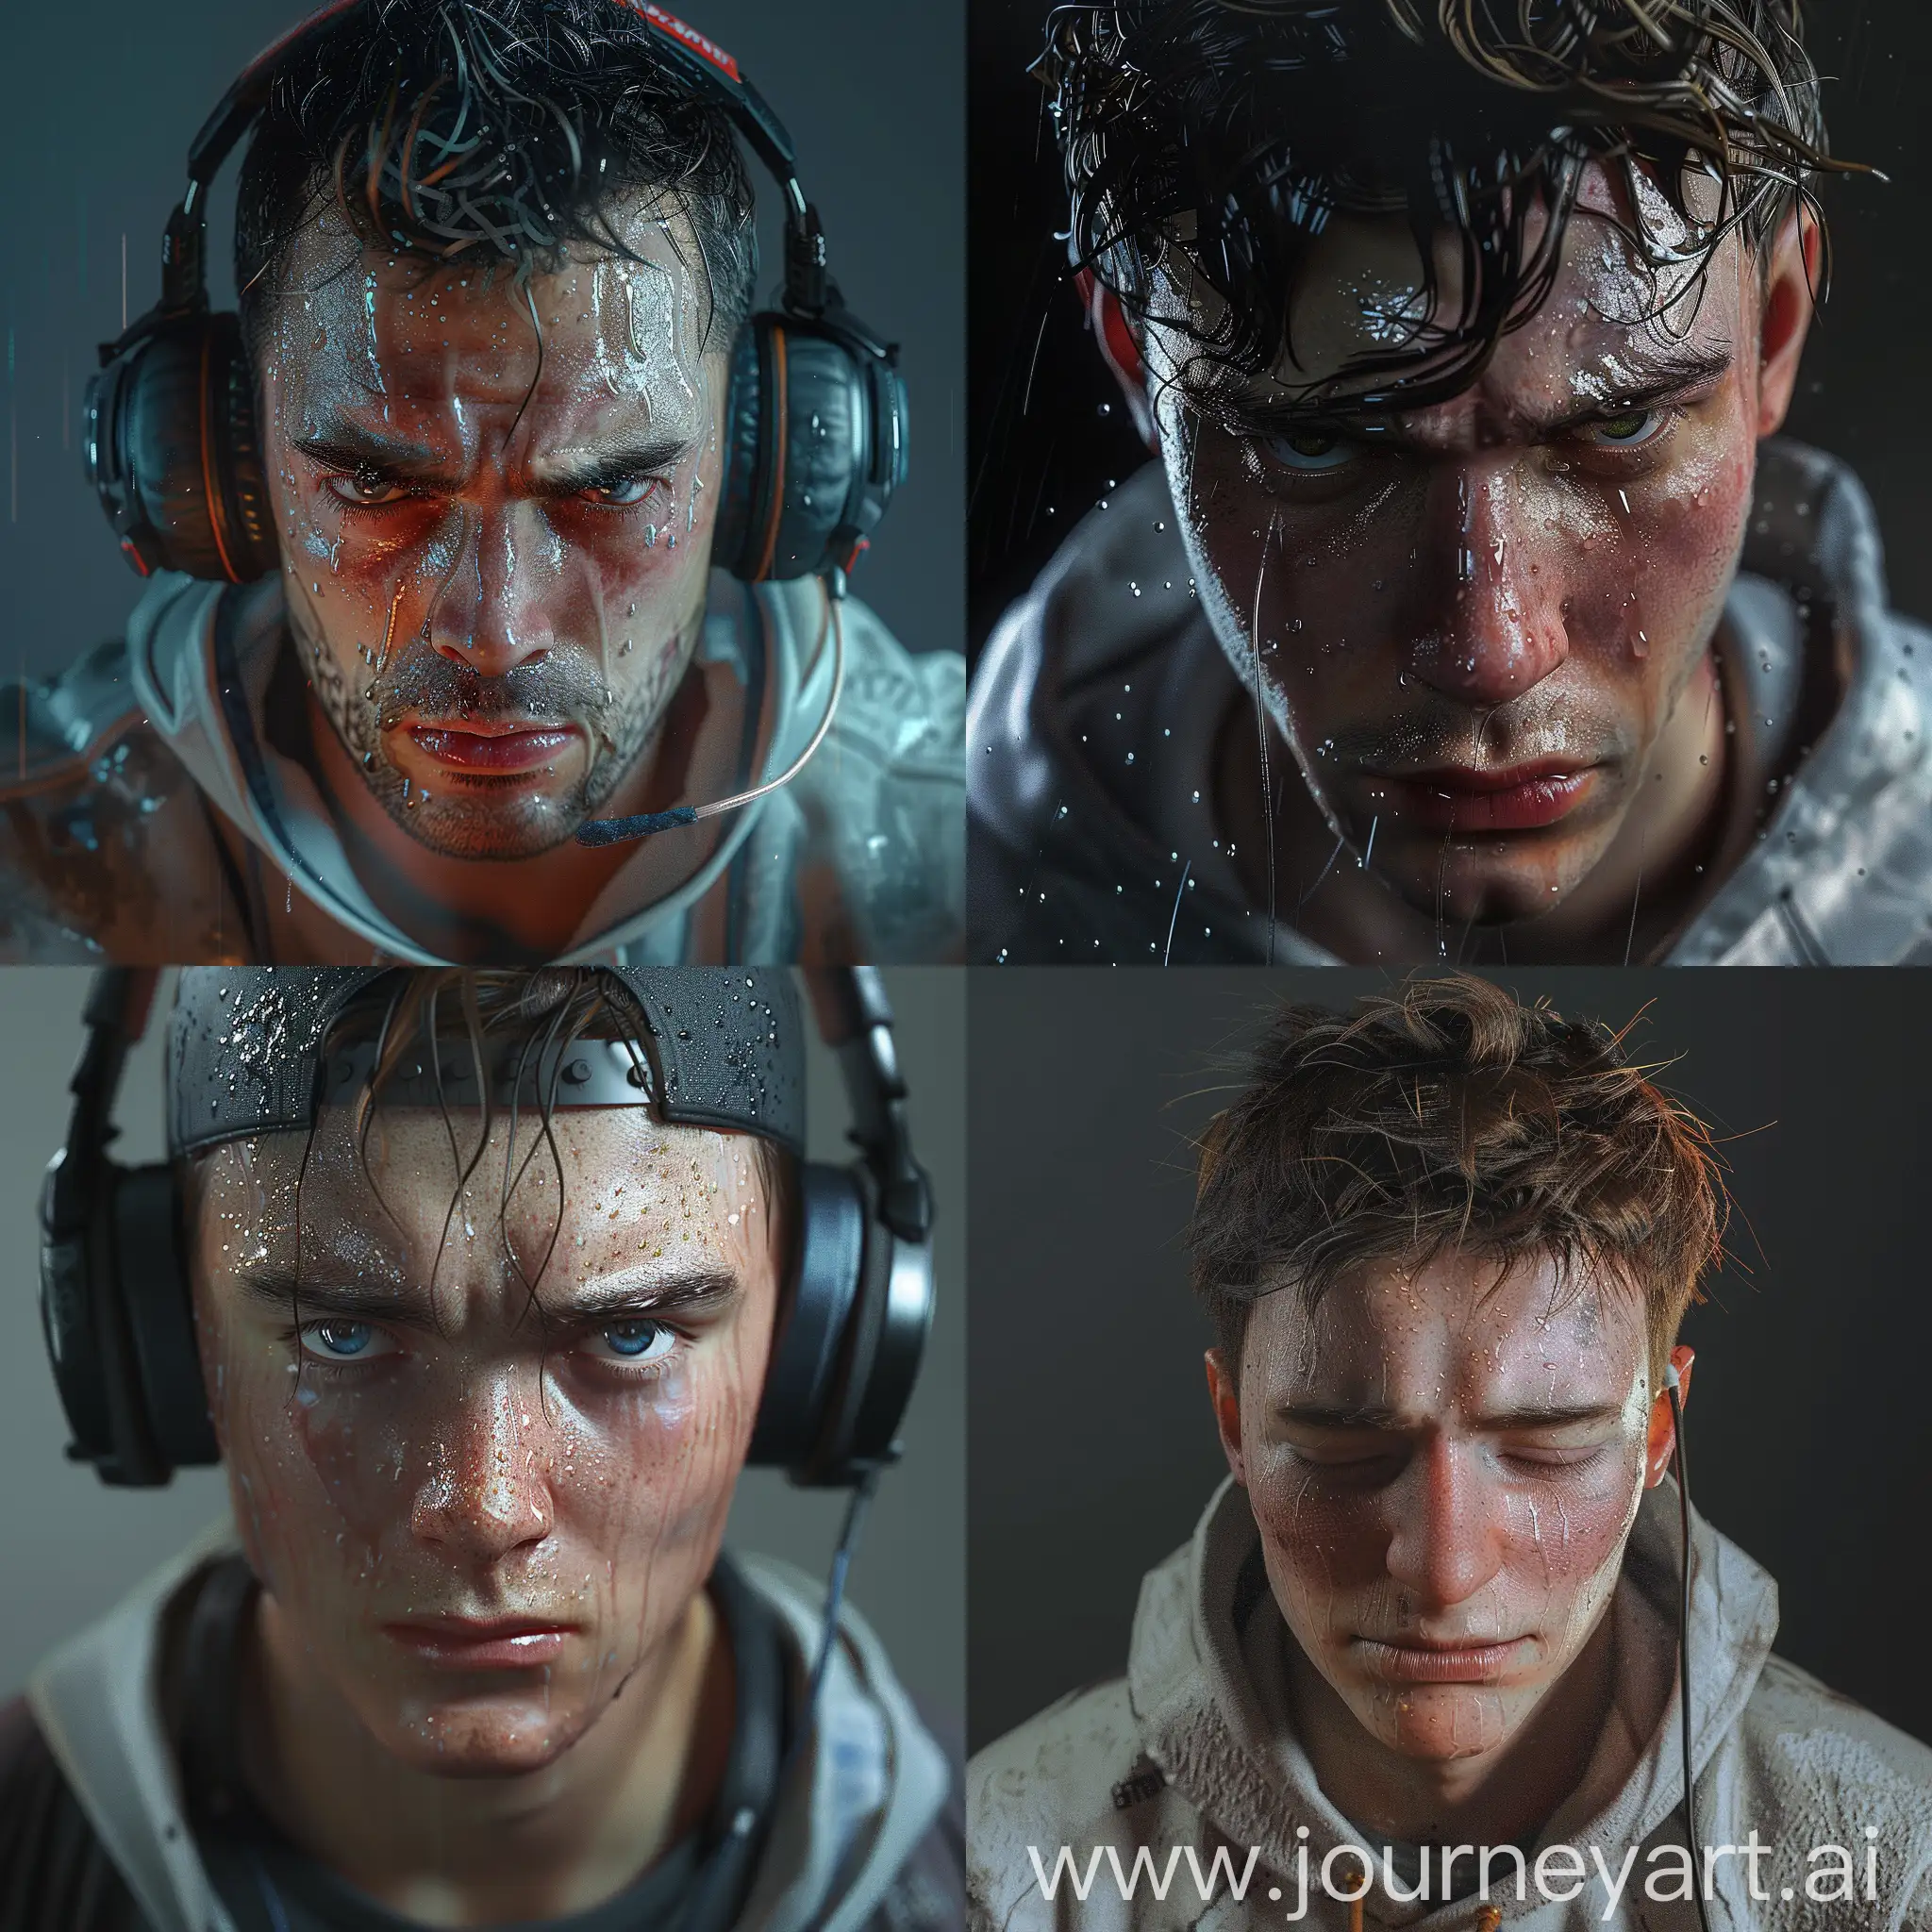 Intense-Gamer-in-Realistic-Setting-with-Perspiration-Digital-Art